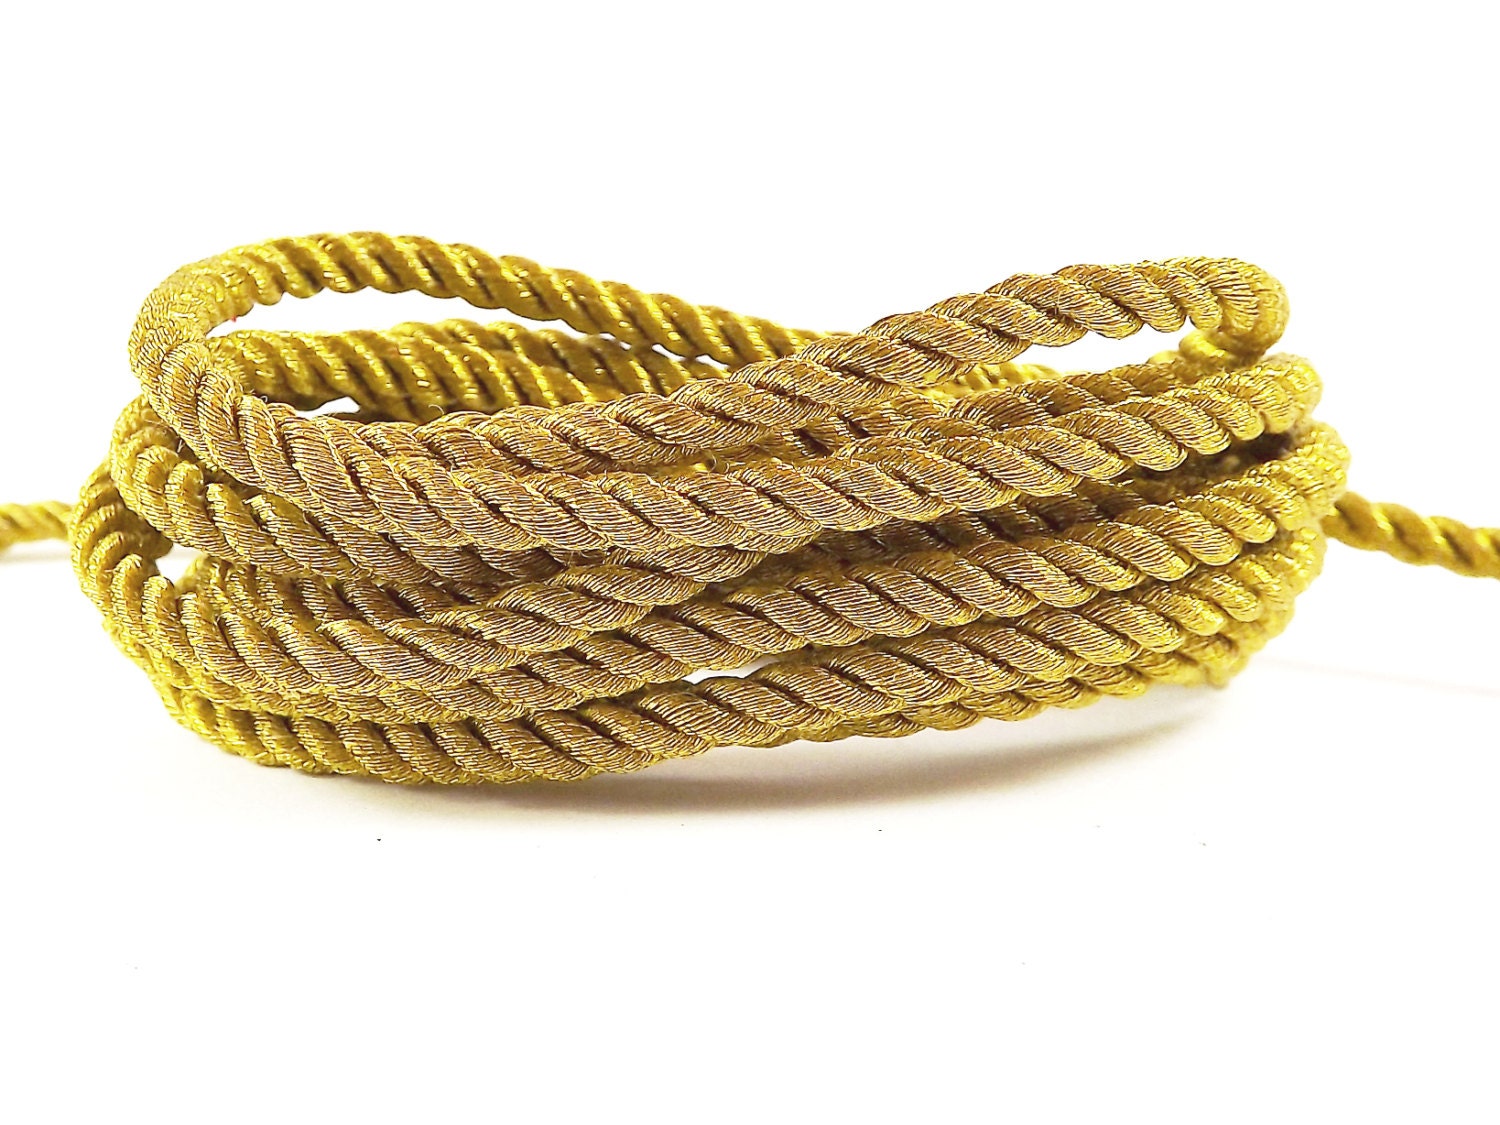 3.5mm Metallic Antique Gold Twisted Rayon Satin Rope Silk Braid Cord - 3 Ply Twist - 1 meters - 1.09 Yards - No:17